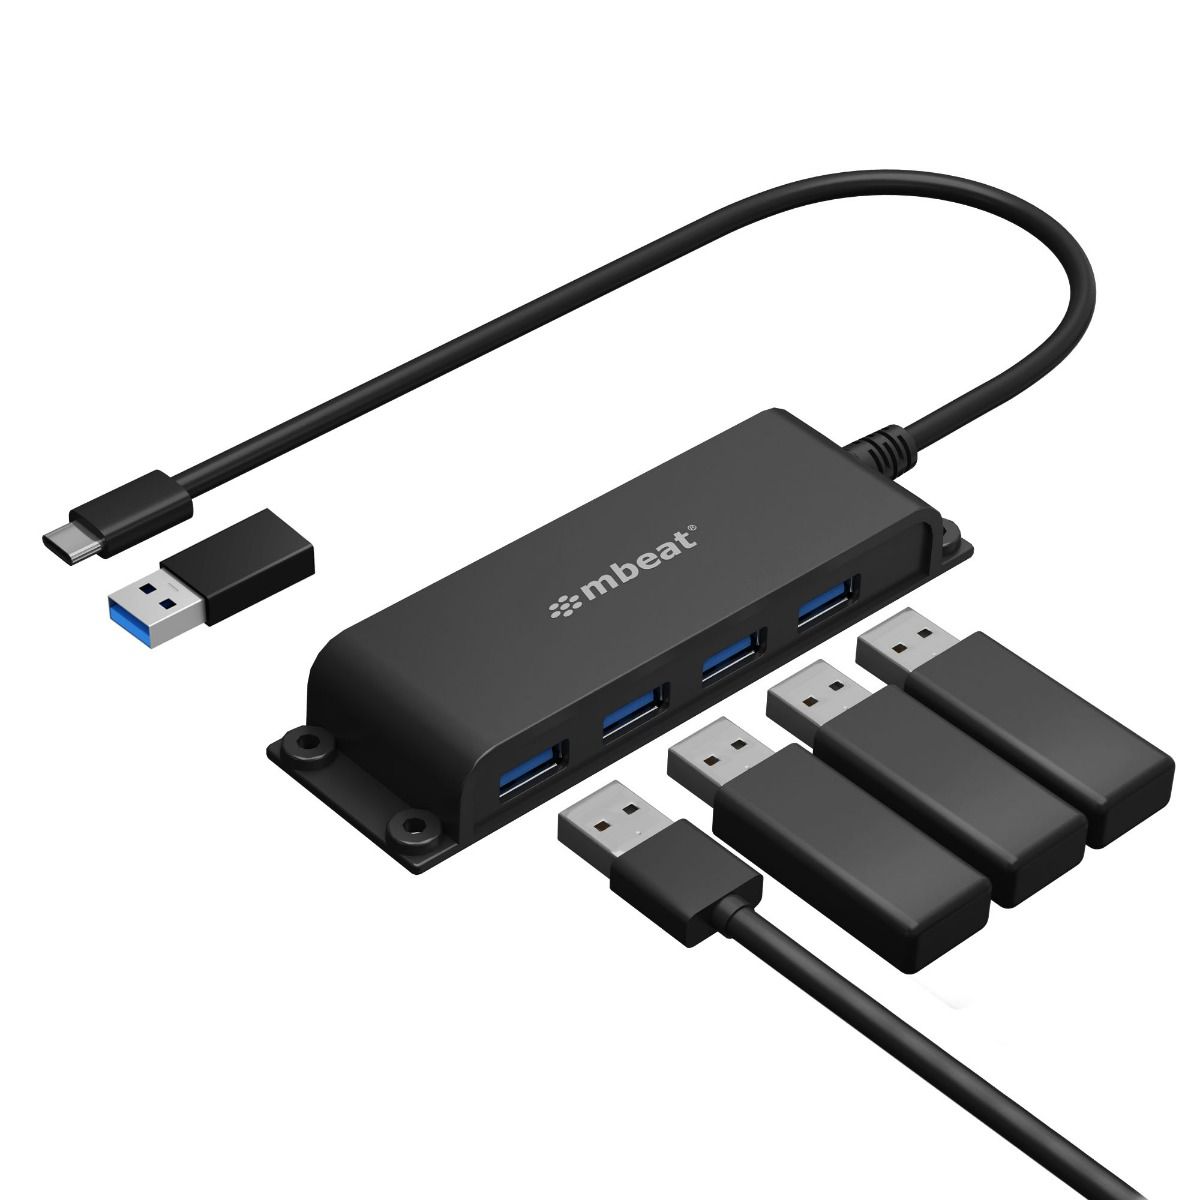 Adapters/MBEAT: mbeatÂ®, Mountable, 4-Port, USB-A, &, USB-C, Adapter, Hub, -, 60cm, Data, Cable, USB, 3.0, 2.0, High-Speed, Data, Port, Expansion, Save, 